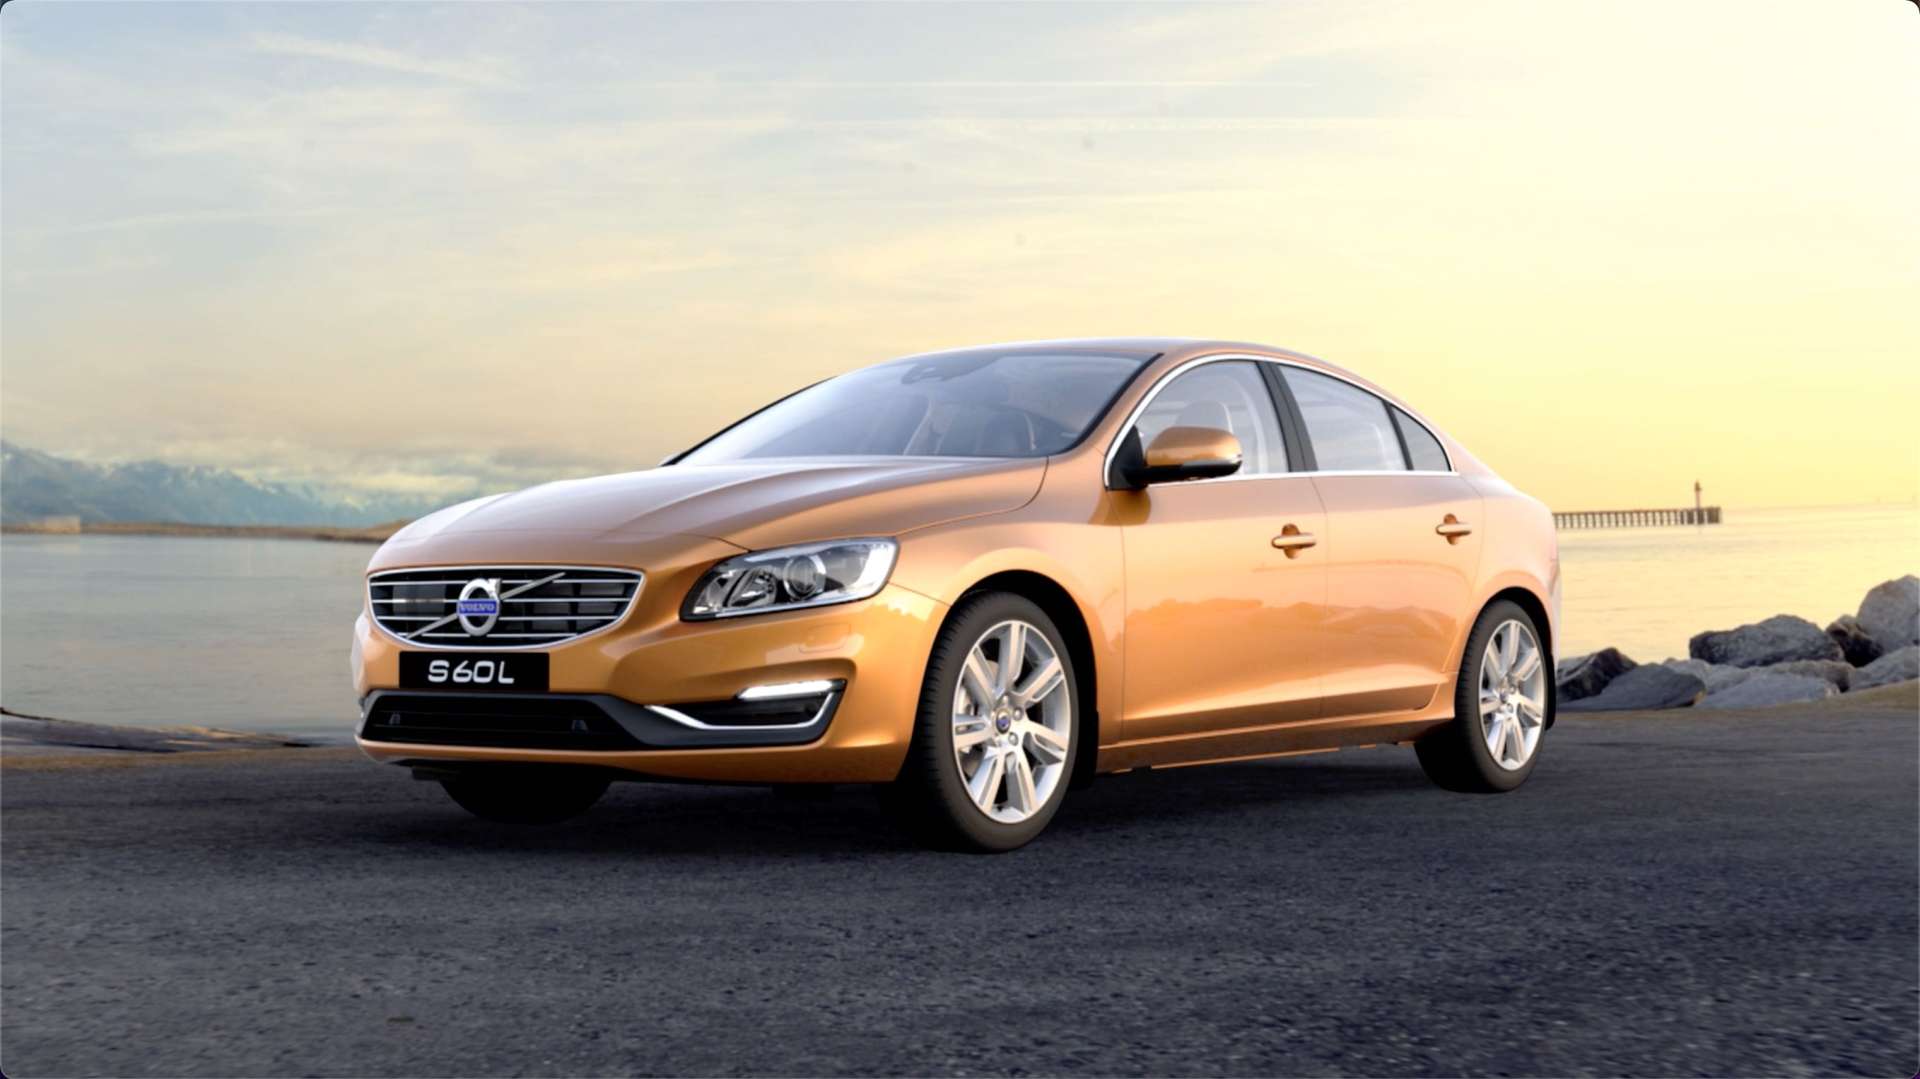 VOLVO S60L Product Video